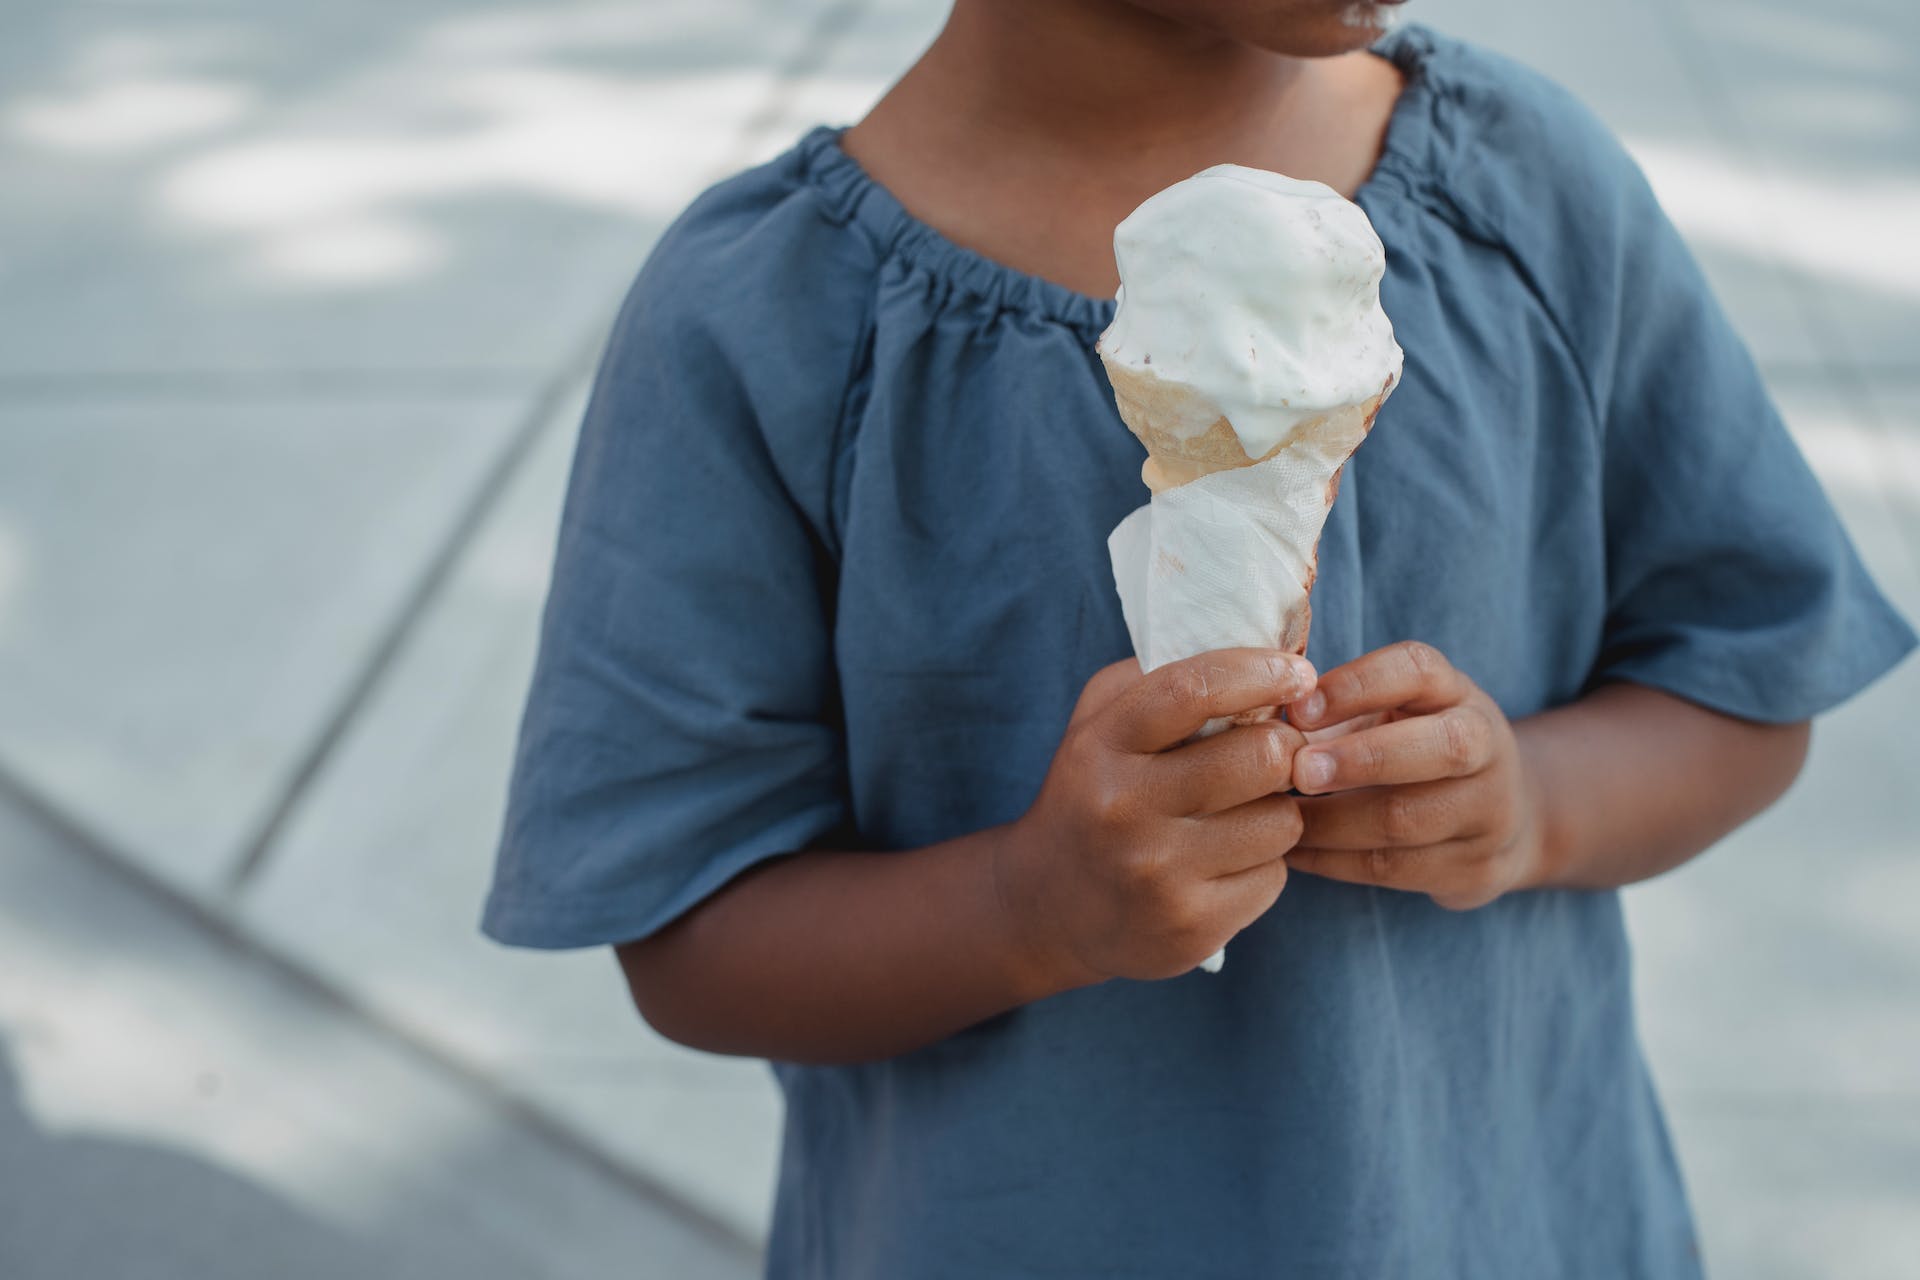 A child holding an ice cream | Source: Pexels